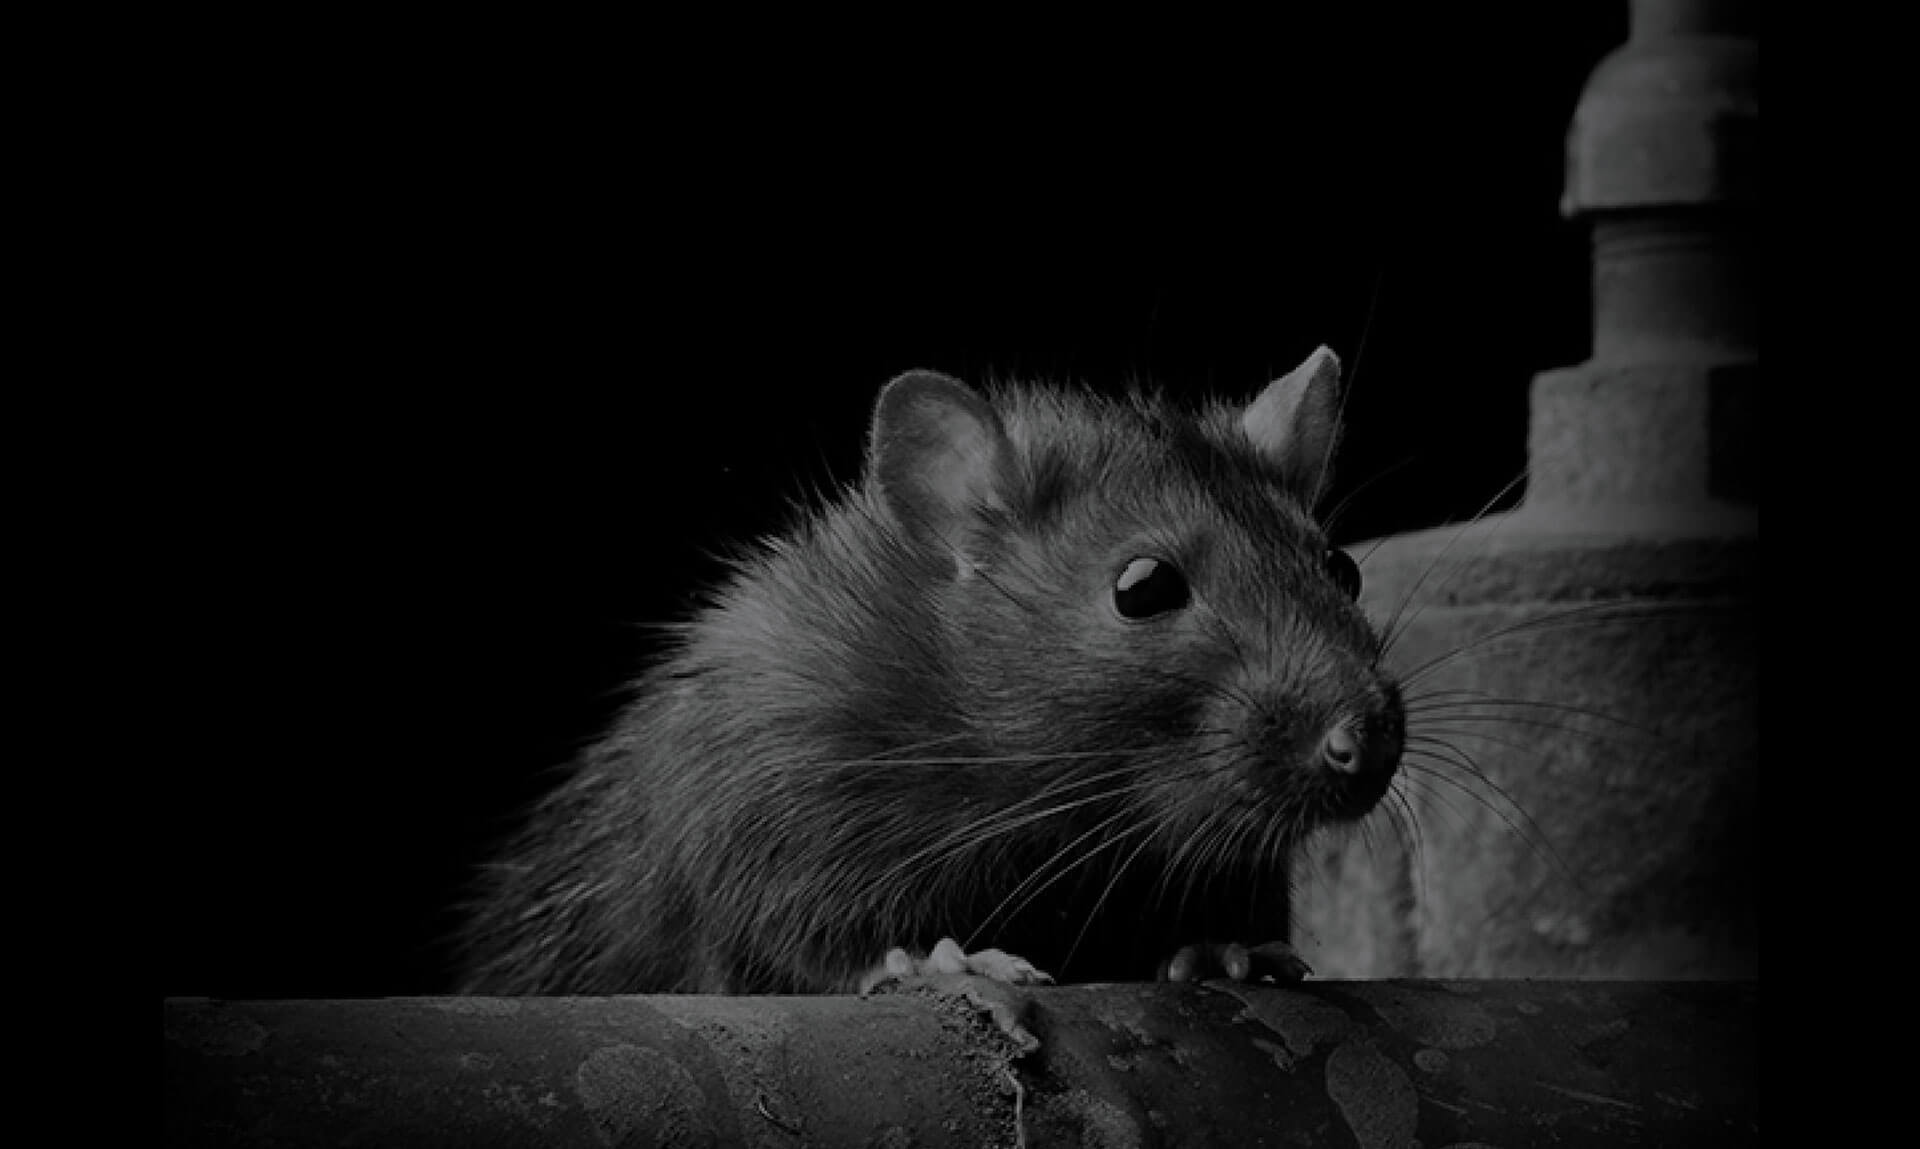 How Far Do Rats Travel from Their Nest?